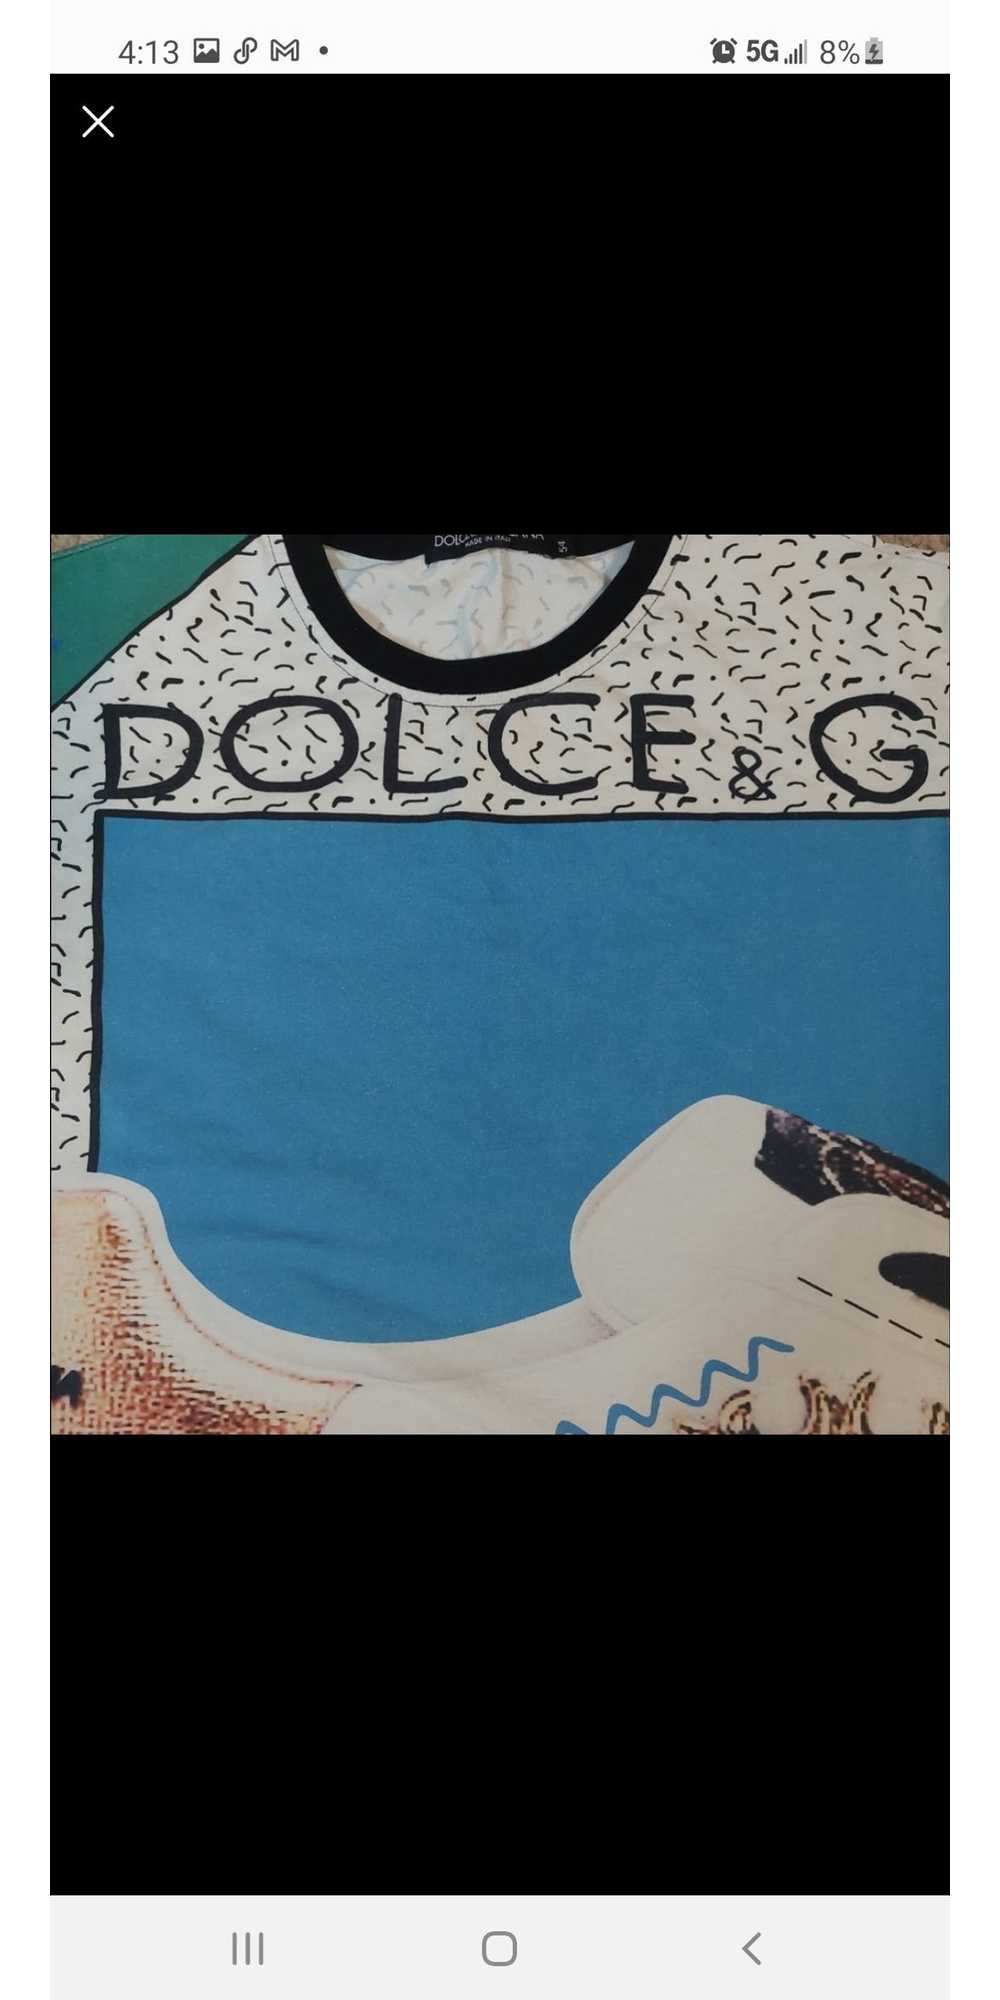 Dolce & Gabbana Just Pizza Tee Shirt in Light Blue - image 5